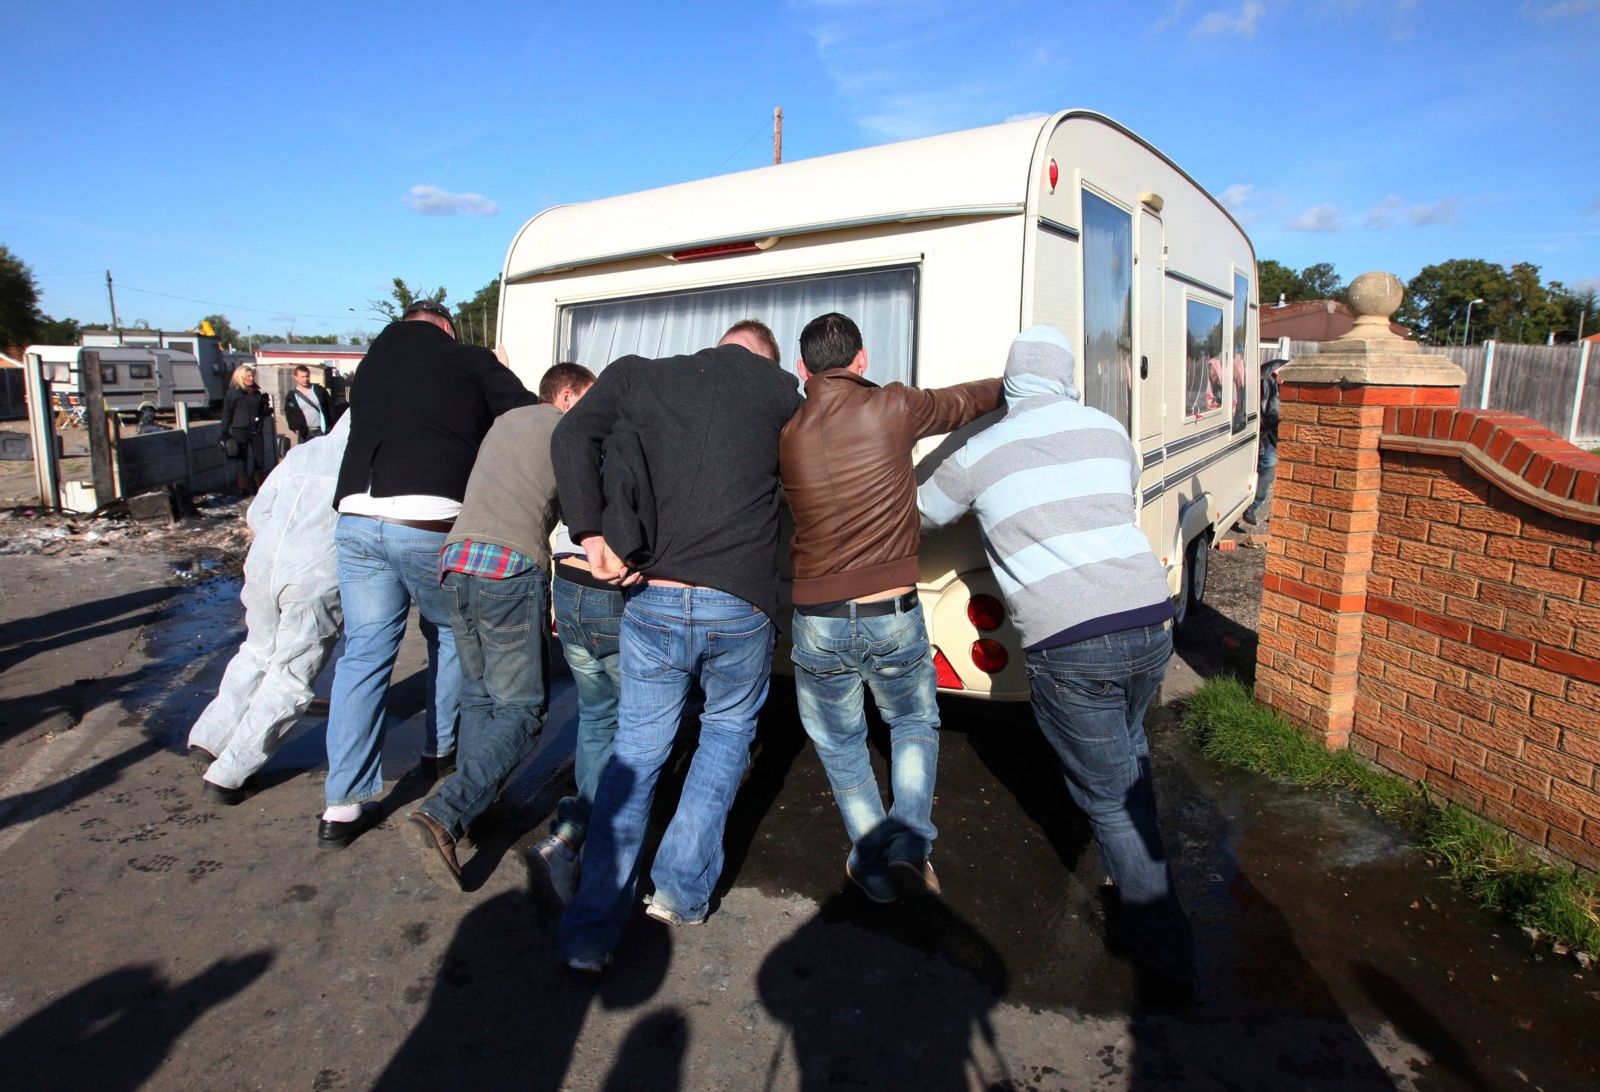 Irish Traveller communities in Cork monitor and campaign for social rights